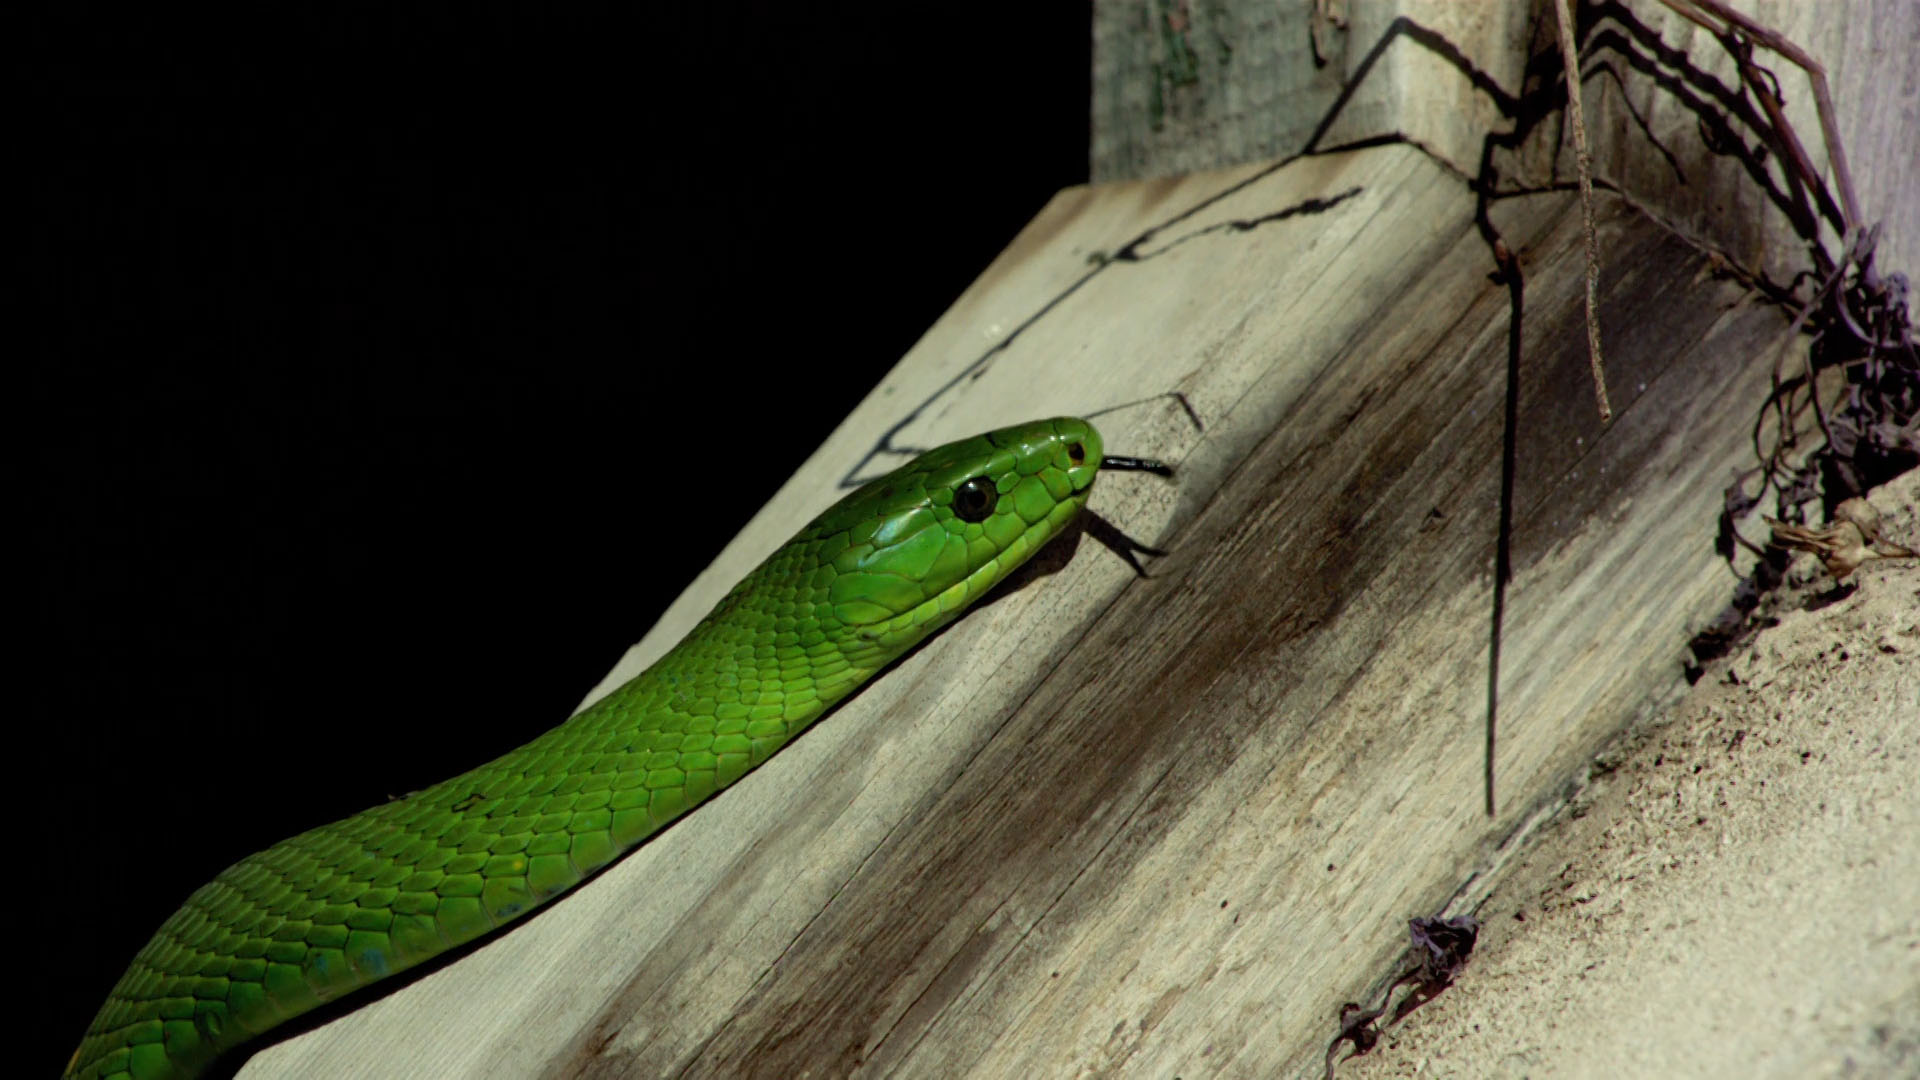 Green Snake Identification - Snake City Video - National Geographic ...